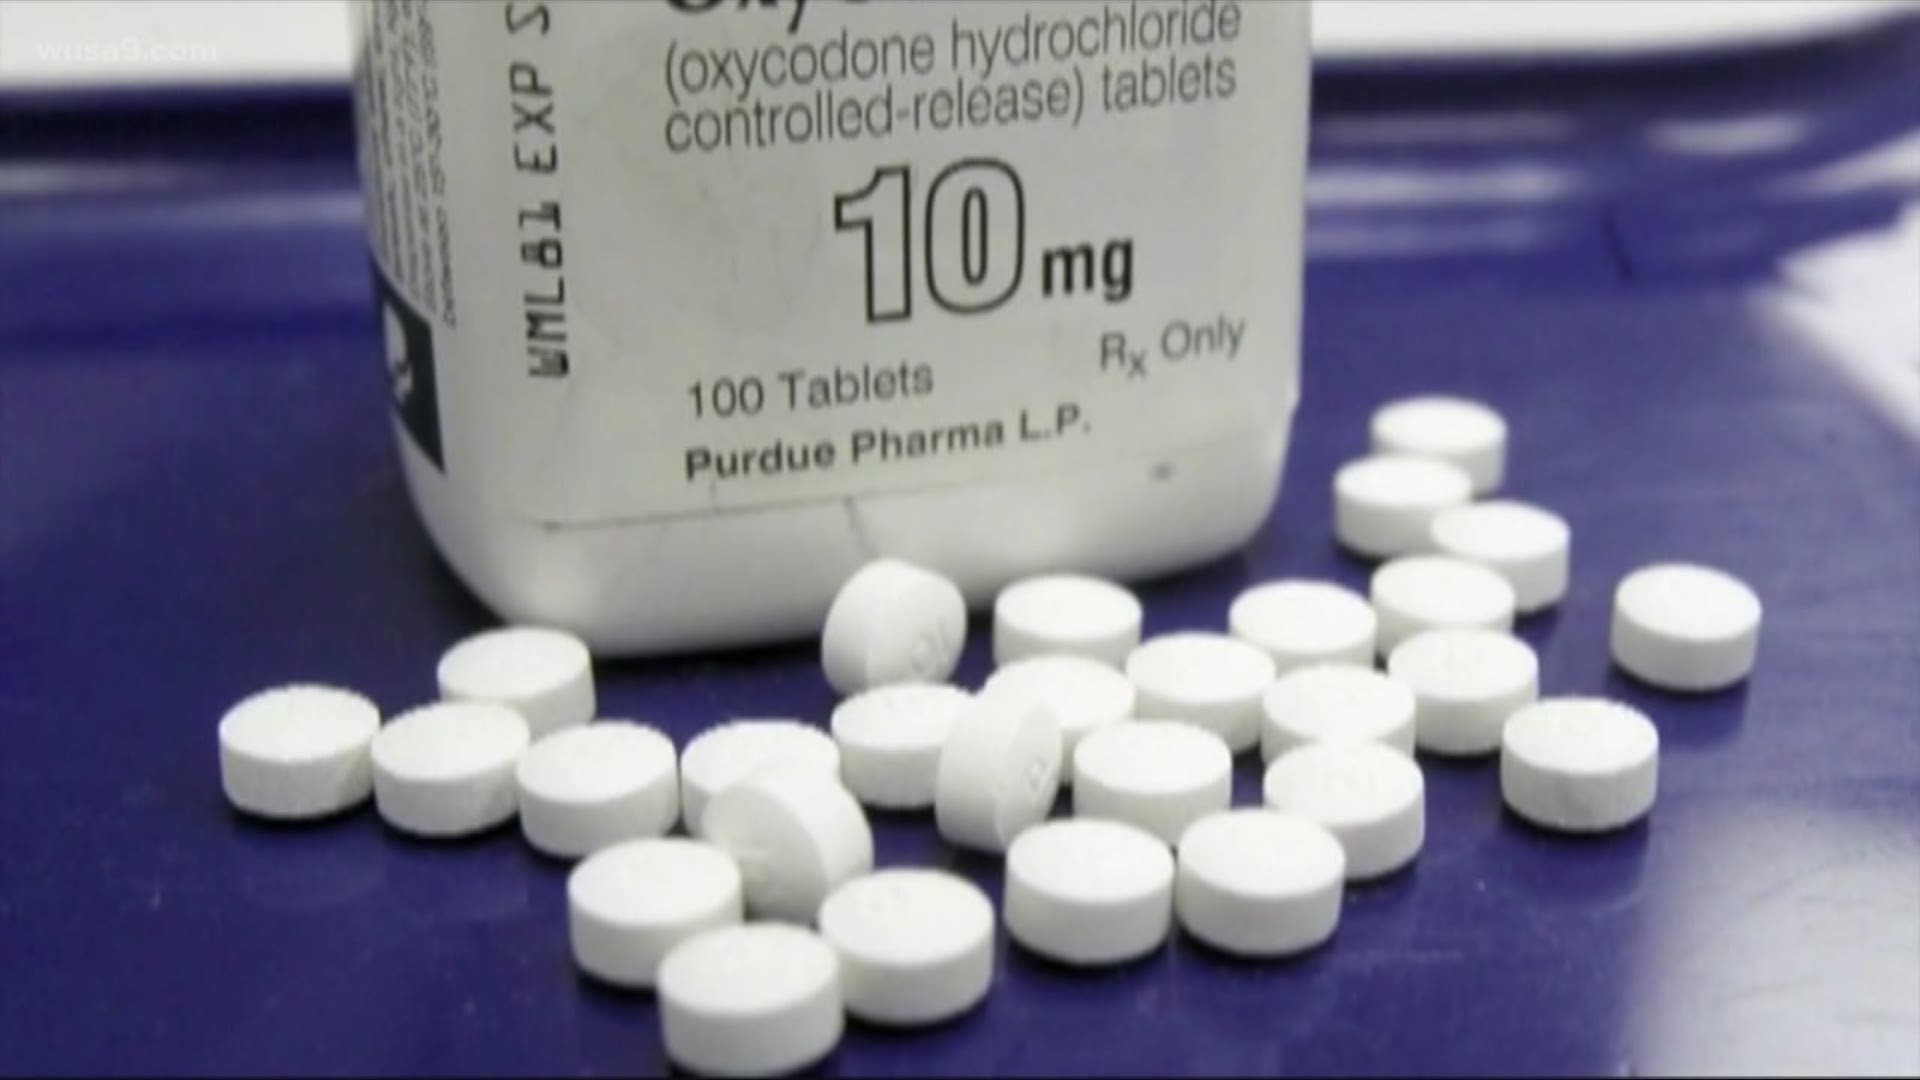 The District has just joined a growing list of governments suing the drug industry for allegedly pushing opioids. The suit claims they made false statements about opioid safety and effectiveness -- to get more people to use them and thereby boost company profits.